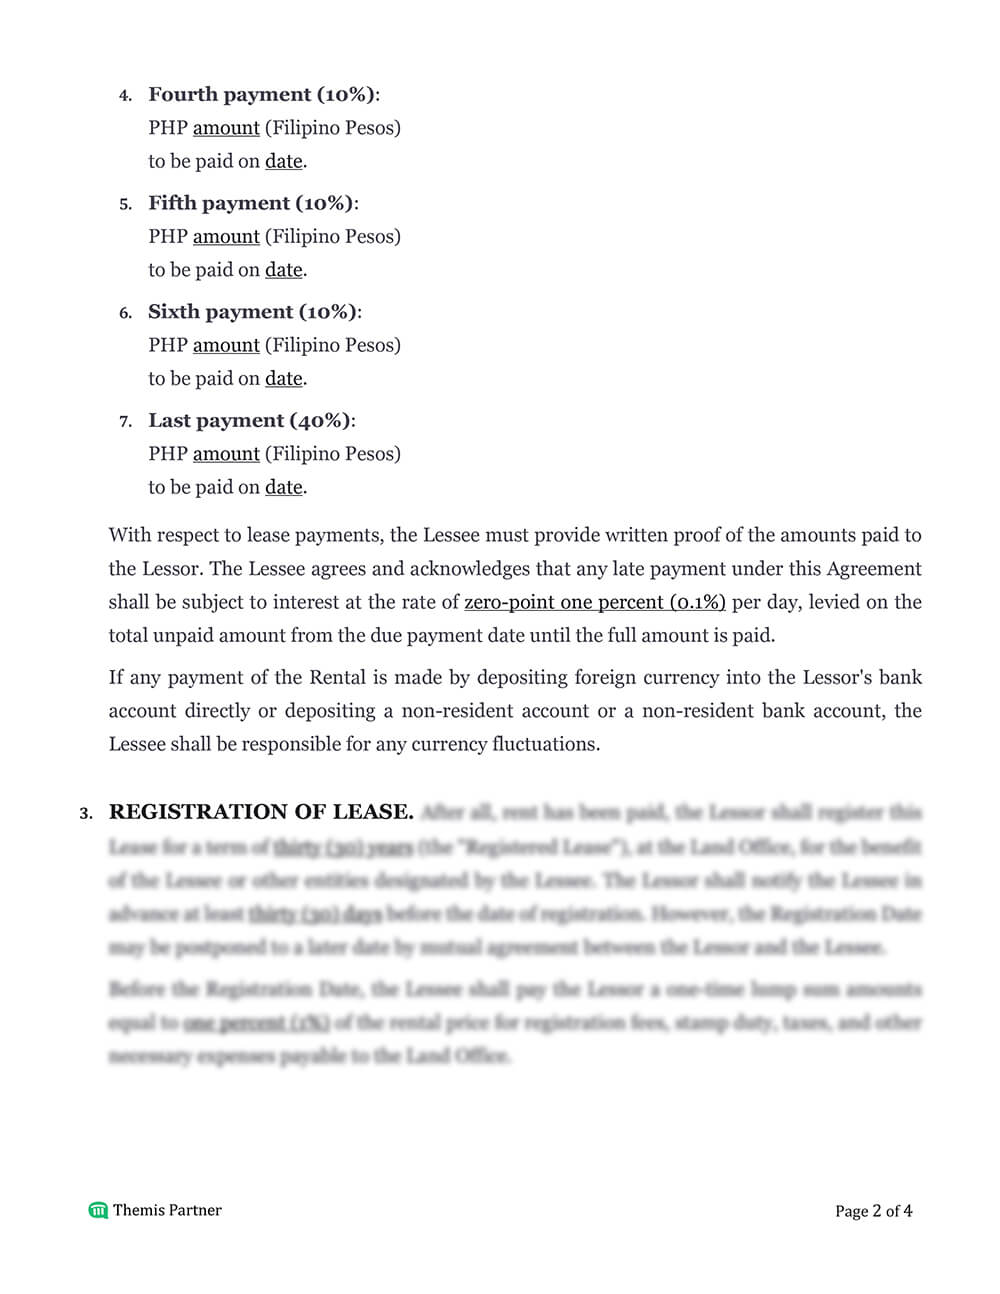 Leasehold agreement template 2